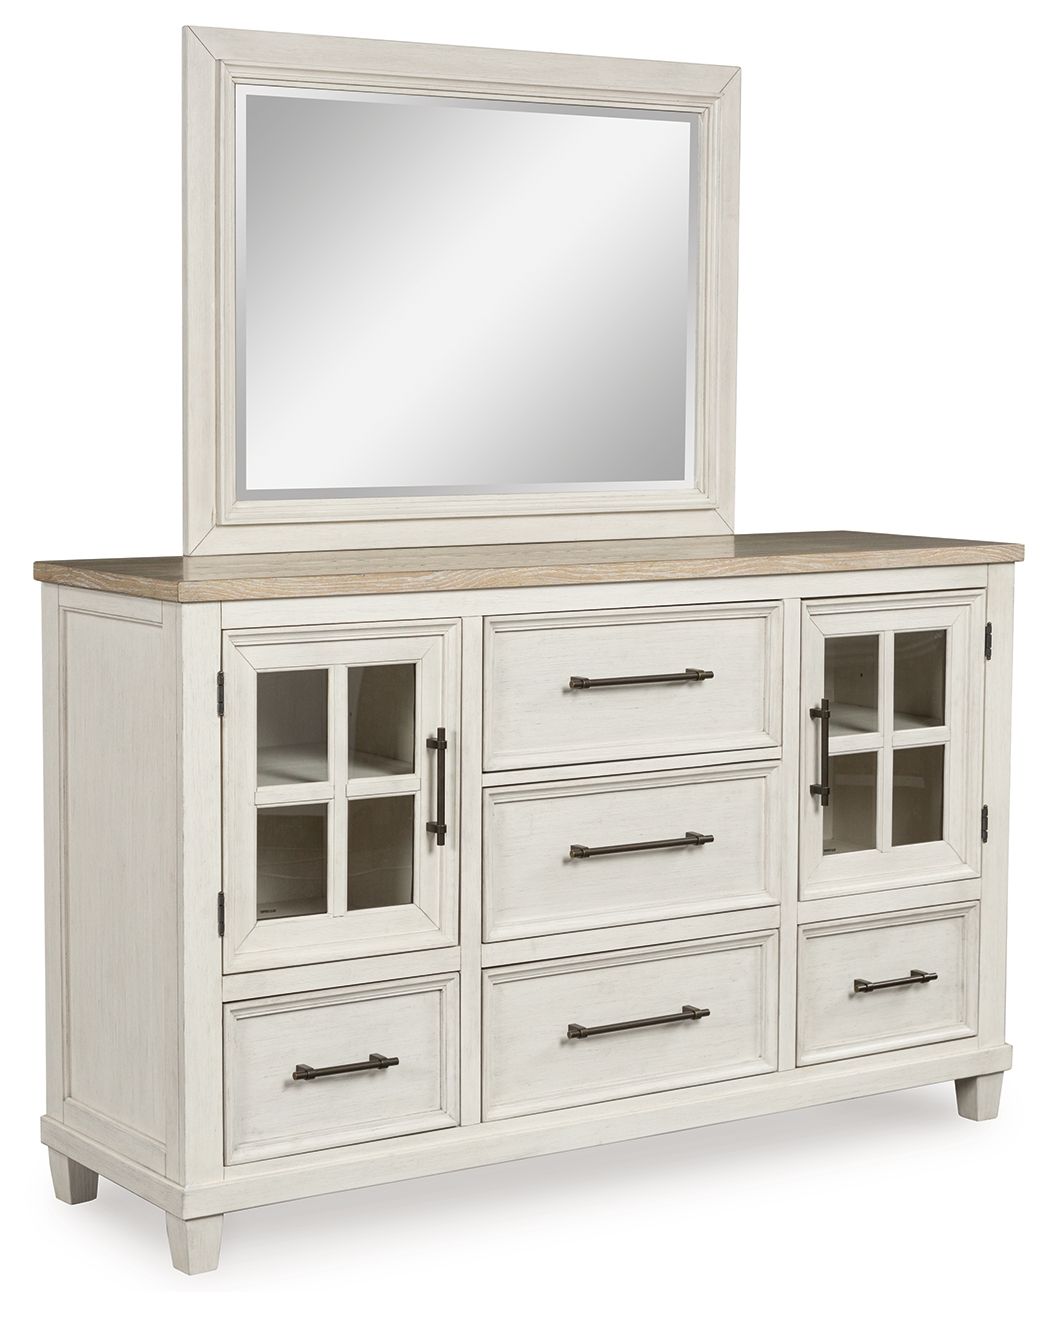 Shaybrock - Antique White / Brown - Dresser And Mirror - Tony's Home Furnishings